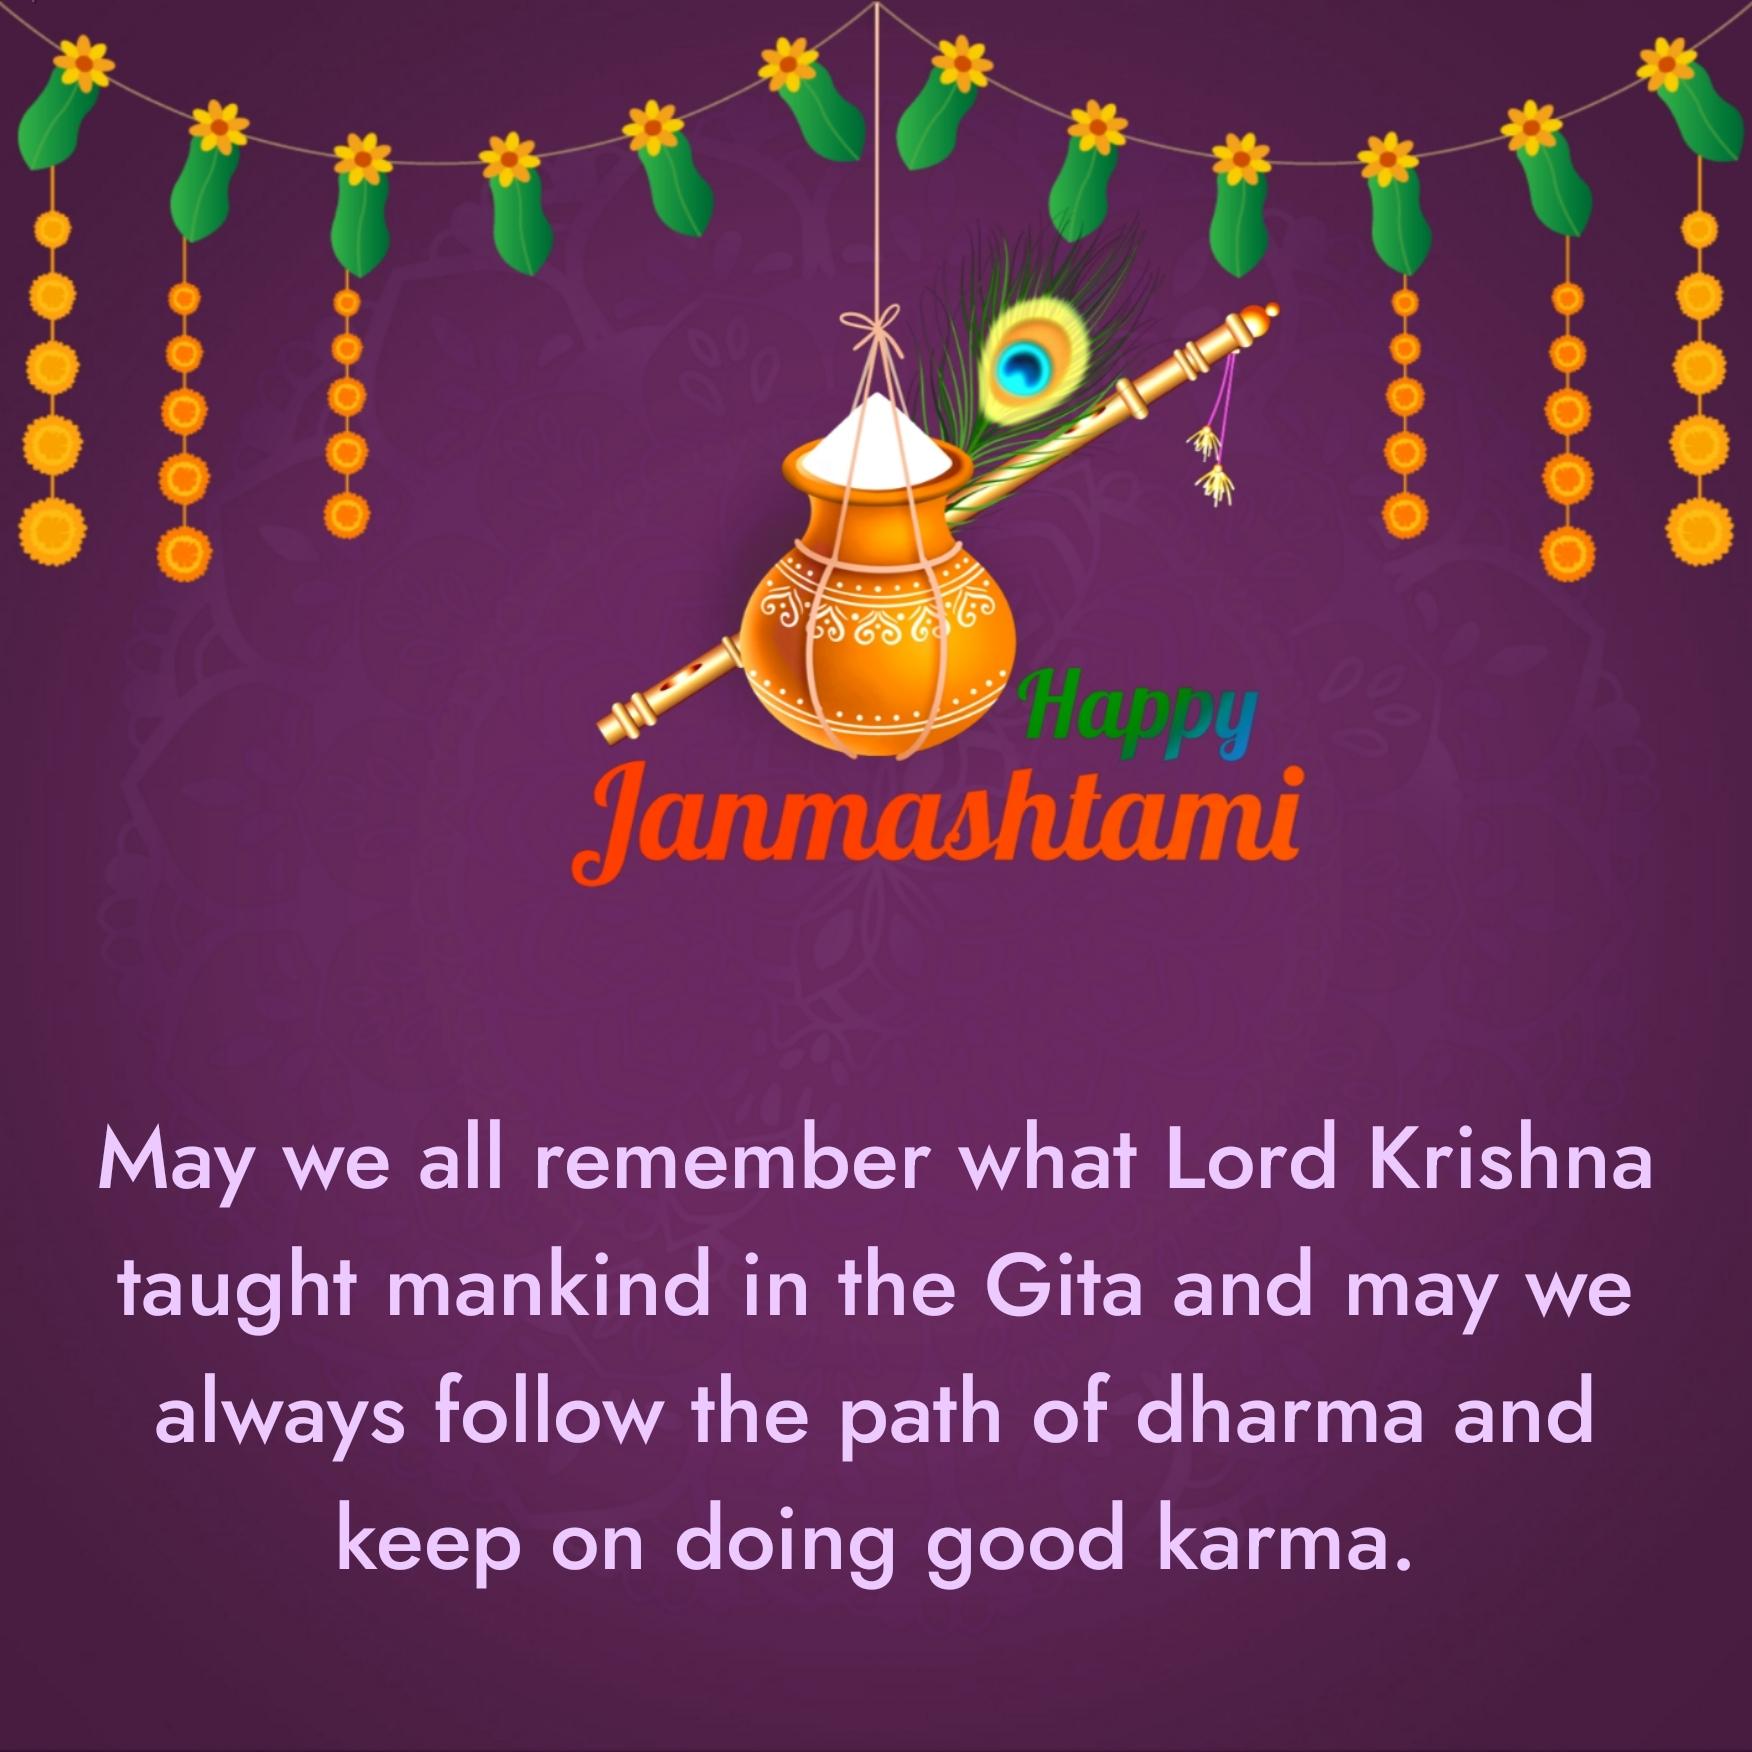 May we all remember what Lord Krishna taught mankind